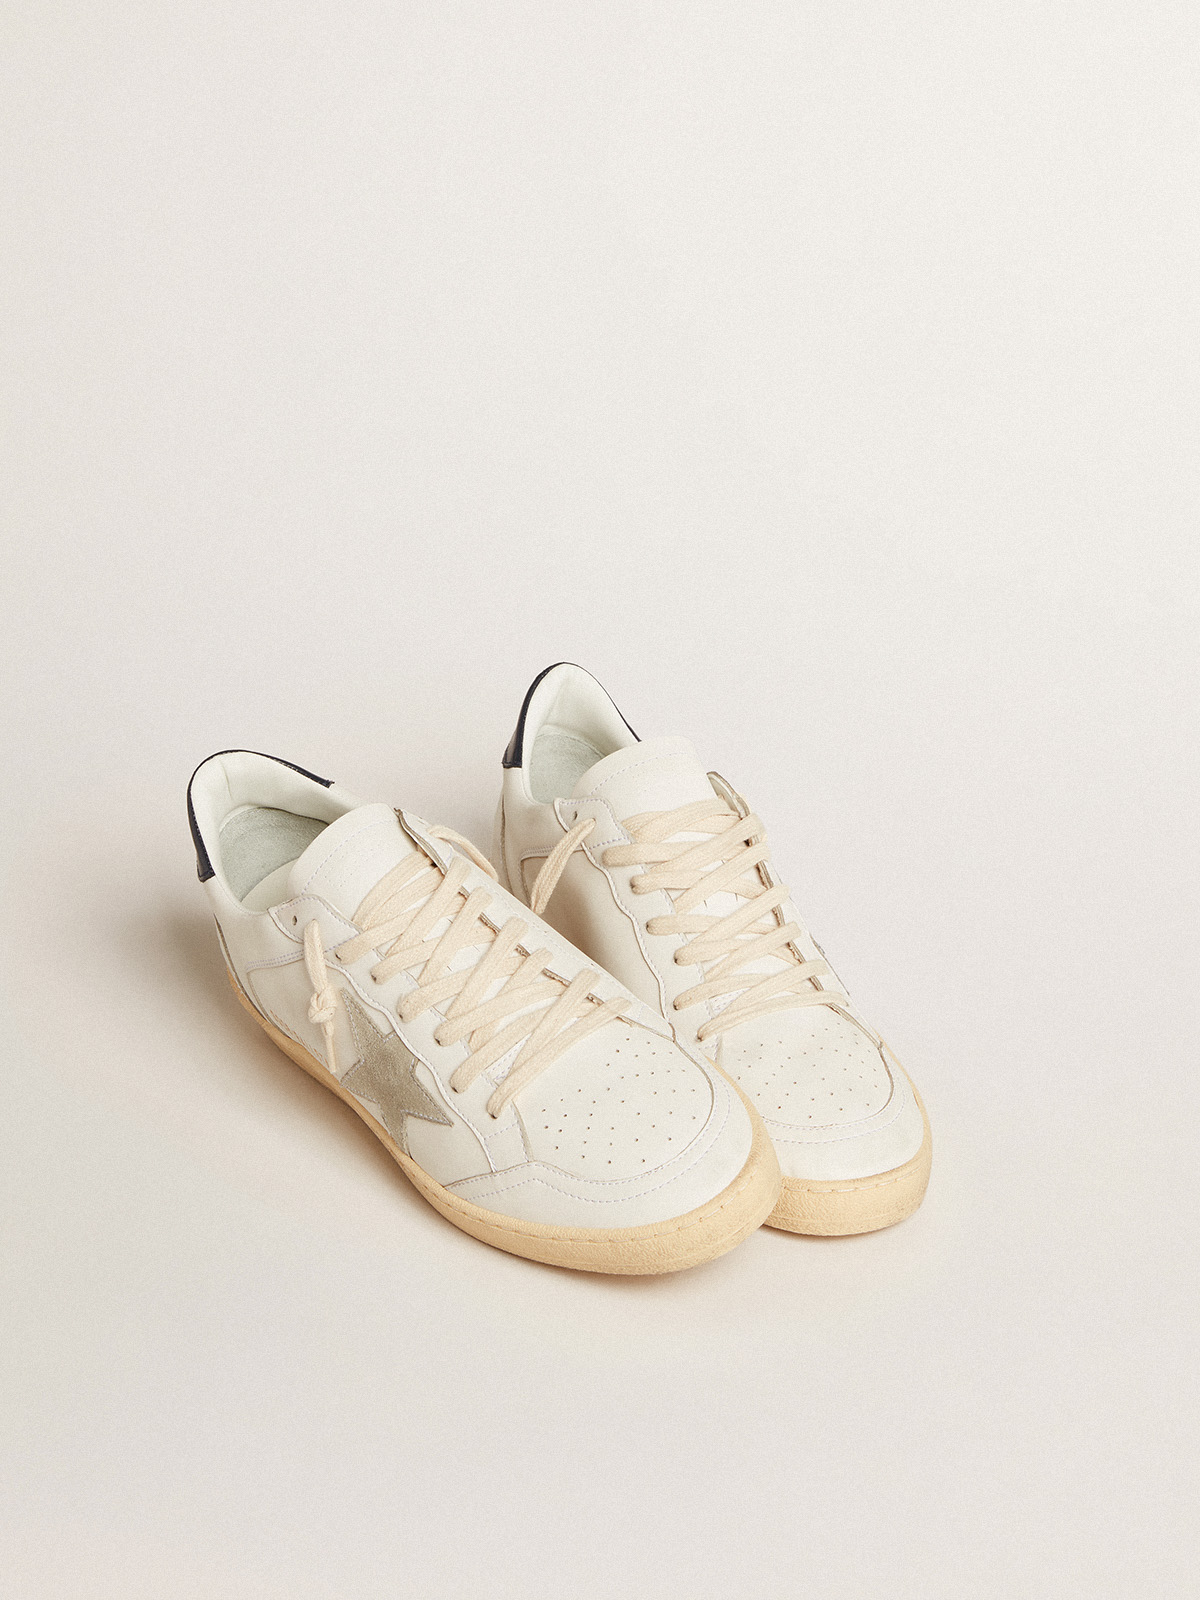 Ball Star with ice-gray suede star and blue leather heel tab | Golden Goose